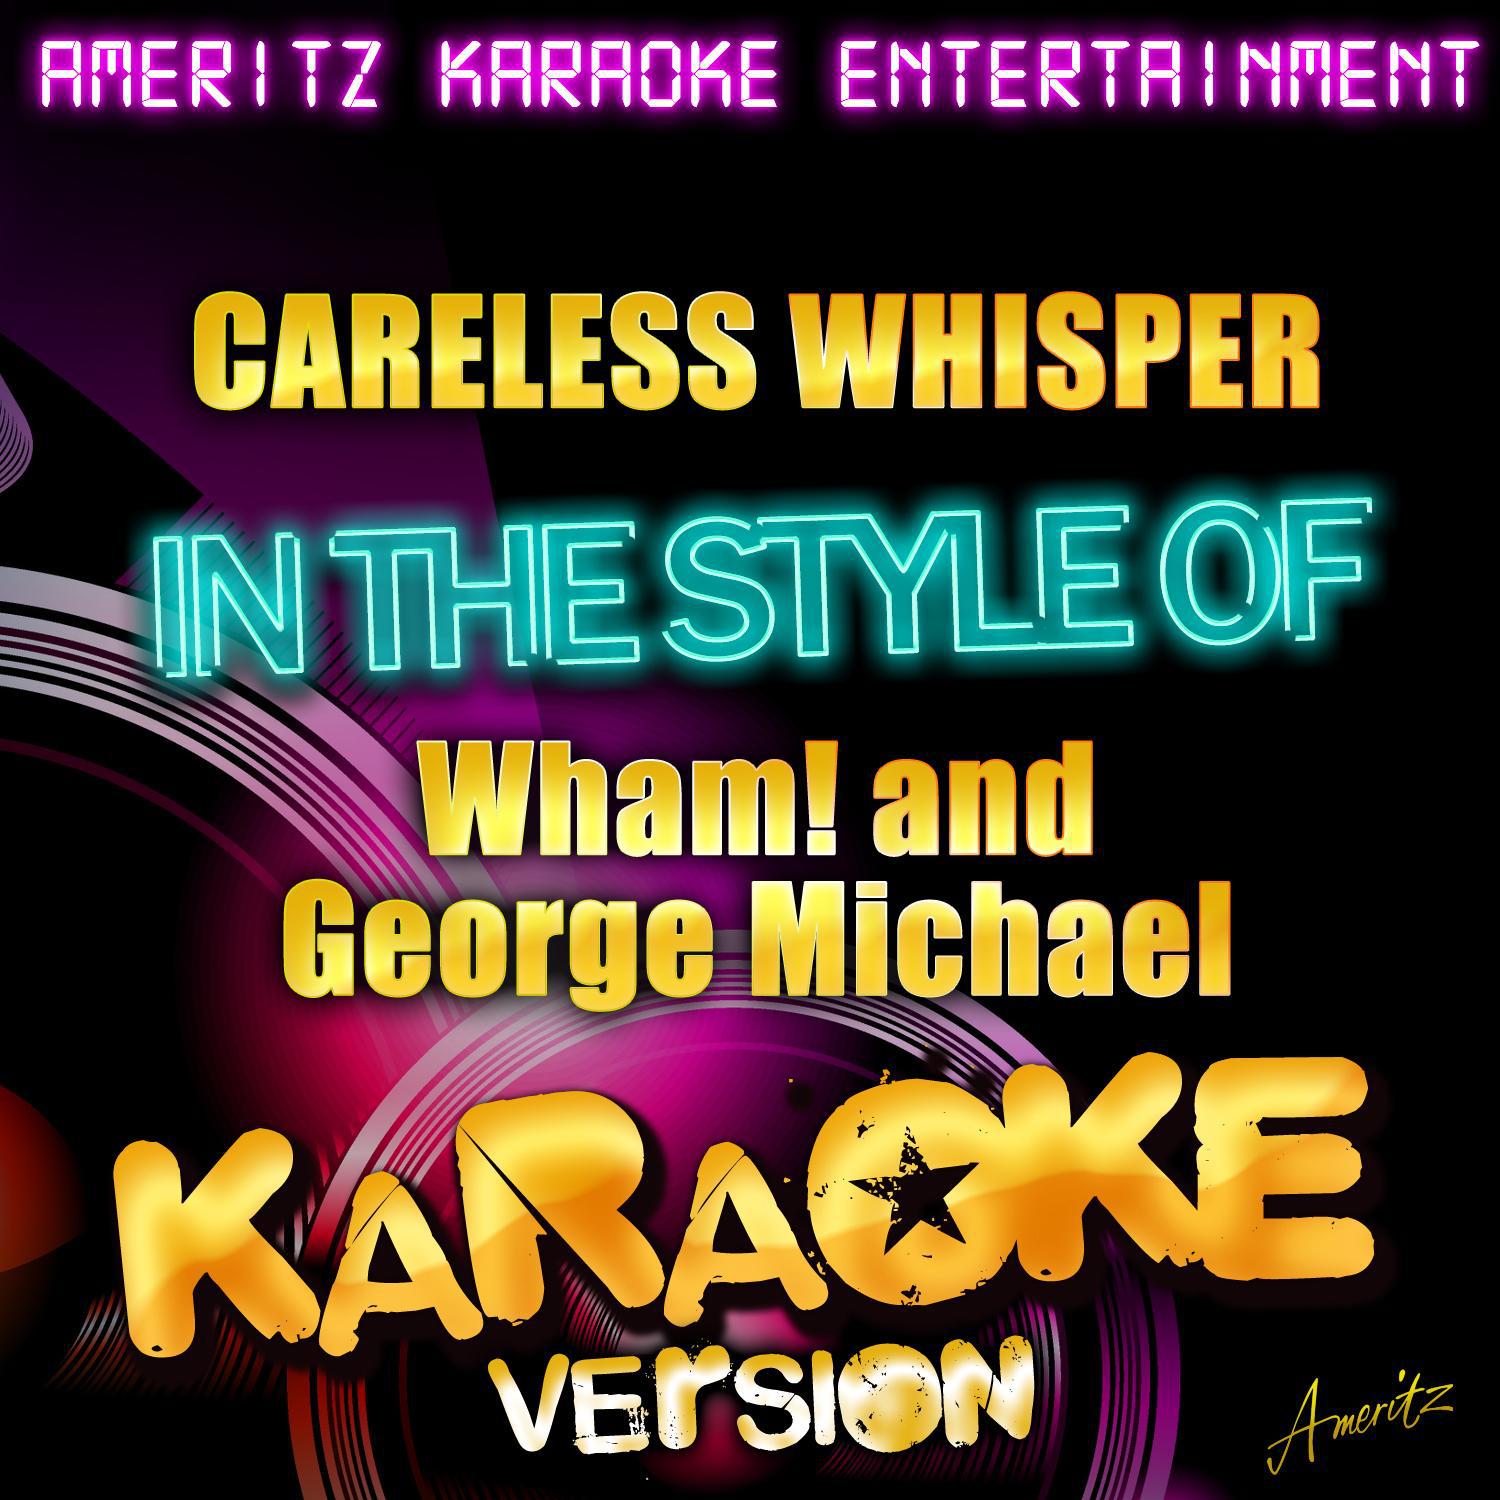 Careless Whisper (In the Style of Wham! And George Michael) [Karaoke Version]